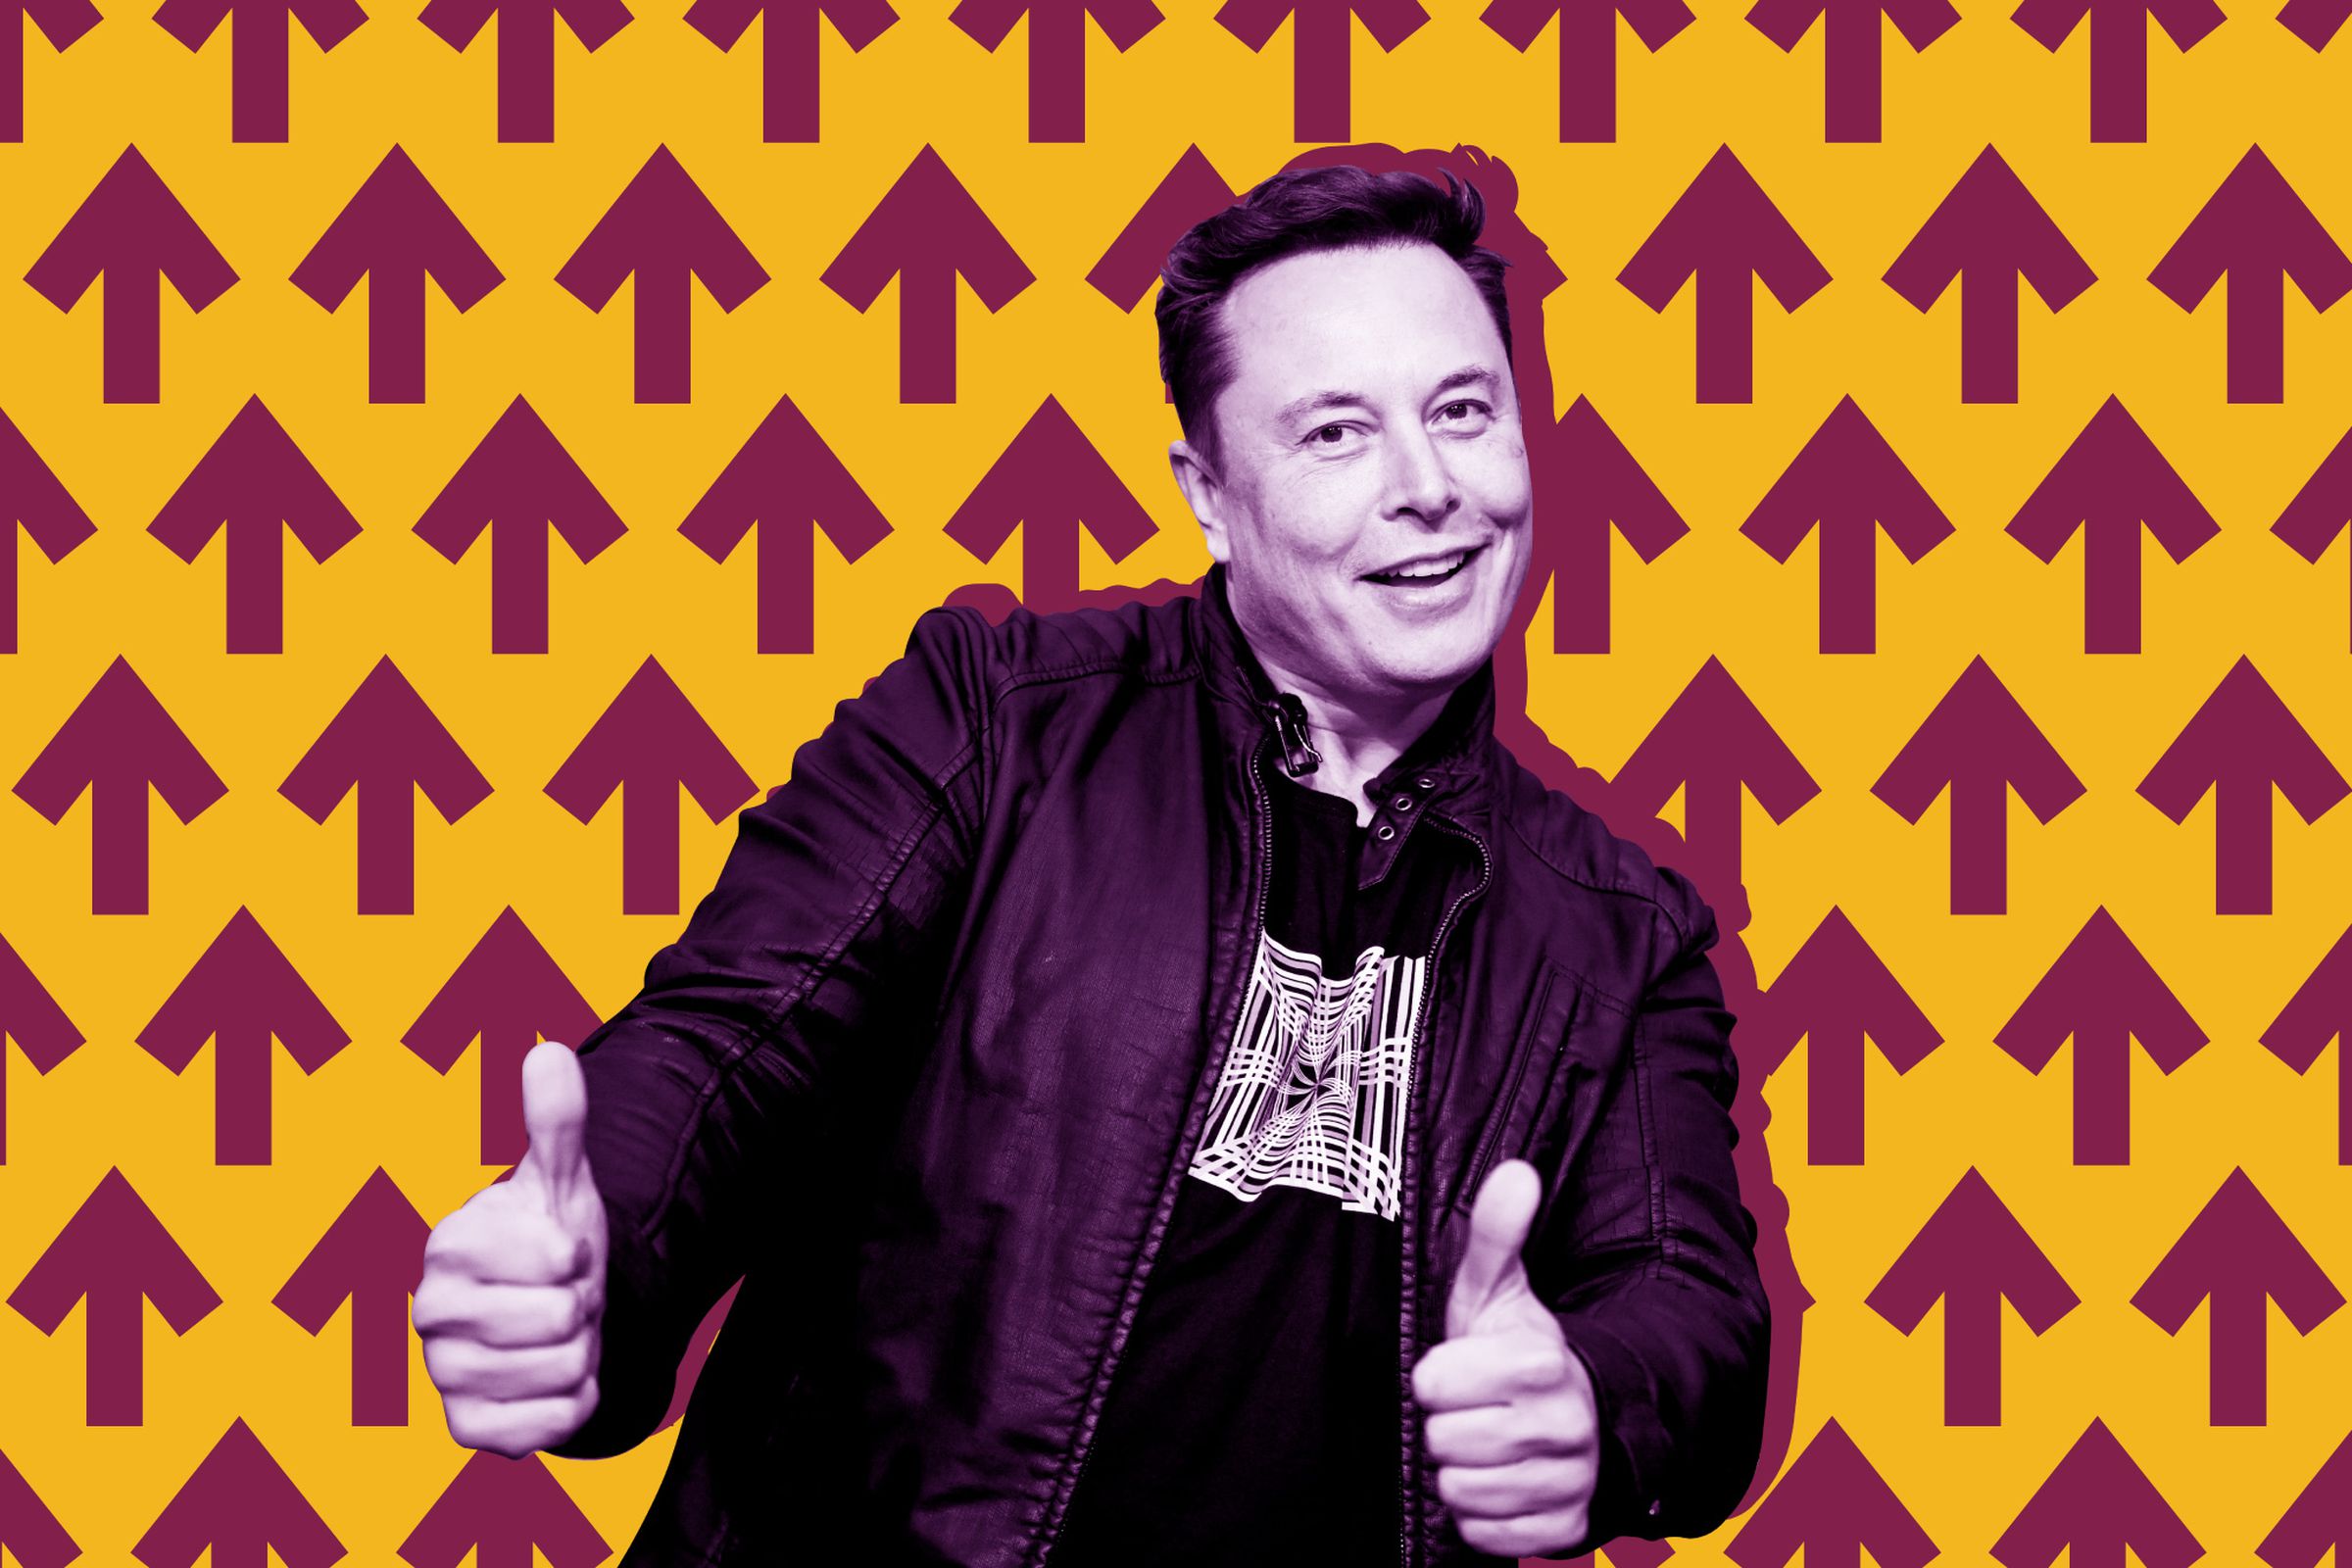 A photo illustration of Elon Musk making a thumbs’ up gesture, against background of arrows pointing up.